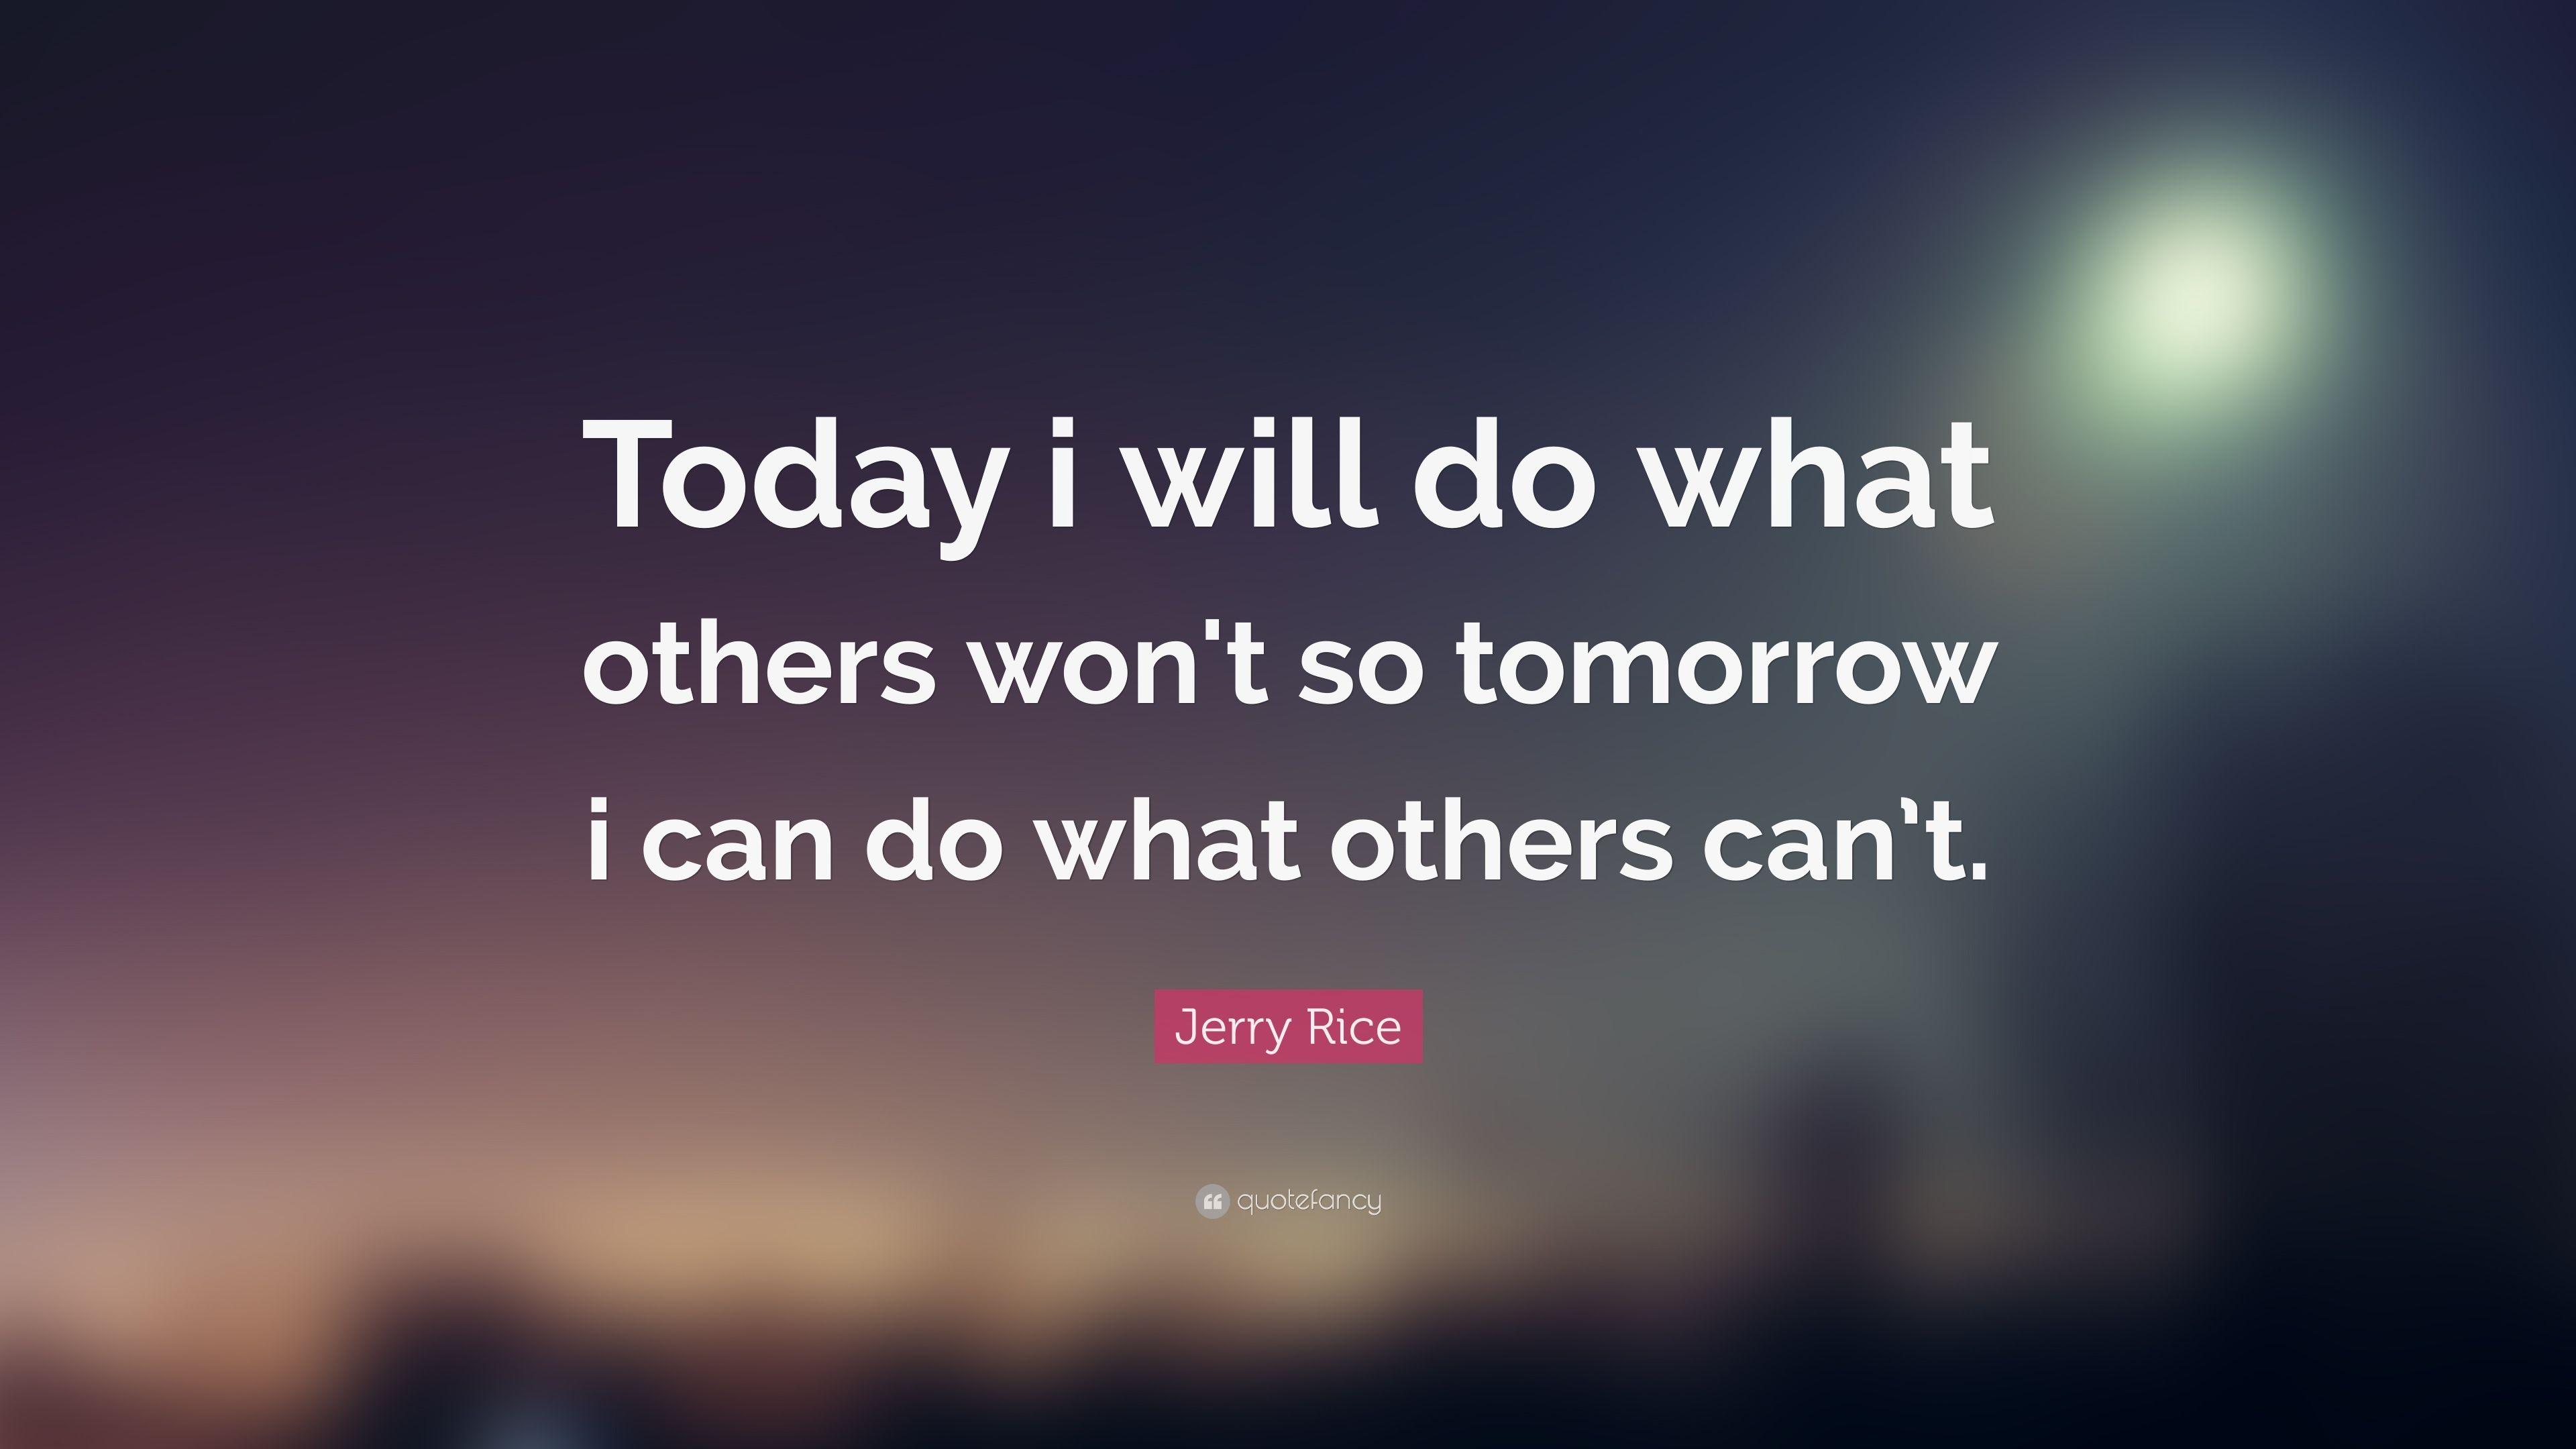 Jerry Rice Quote: “Today i will do what others won't so tomorrow i